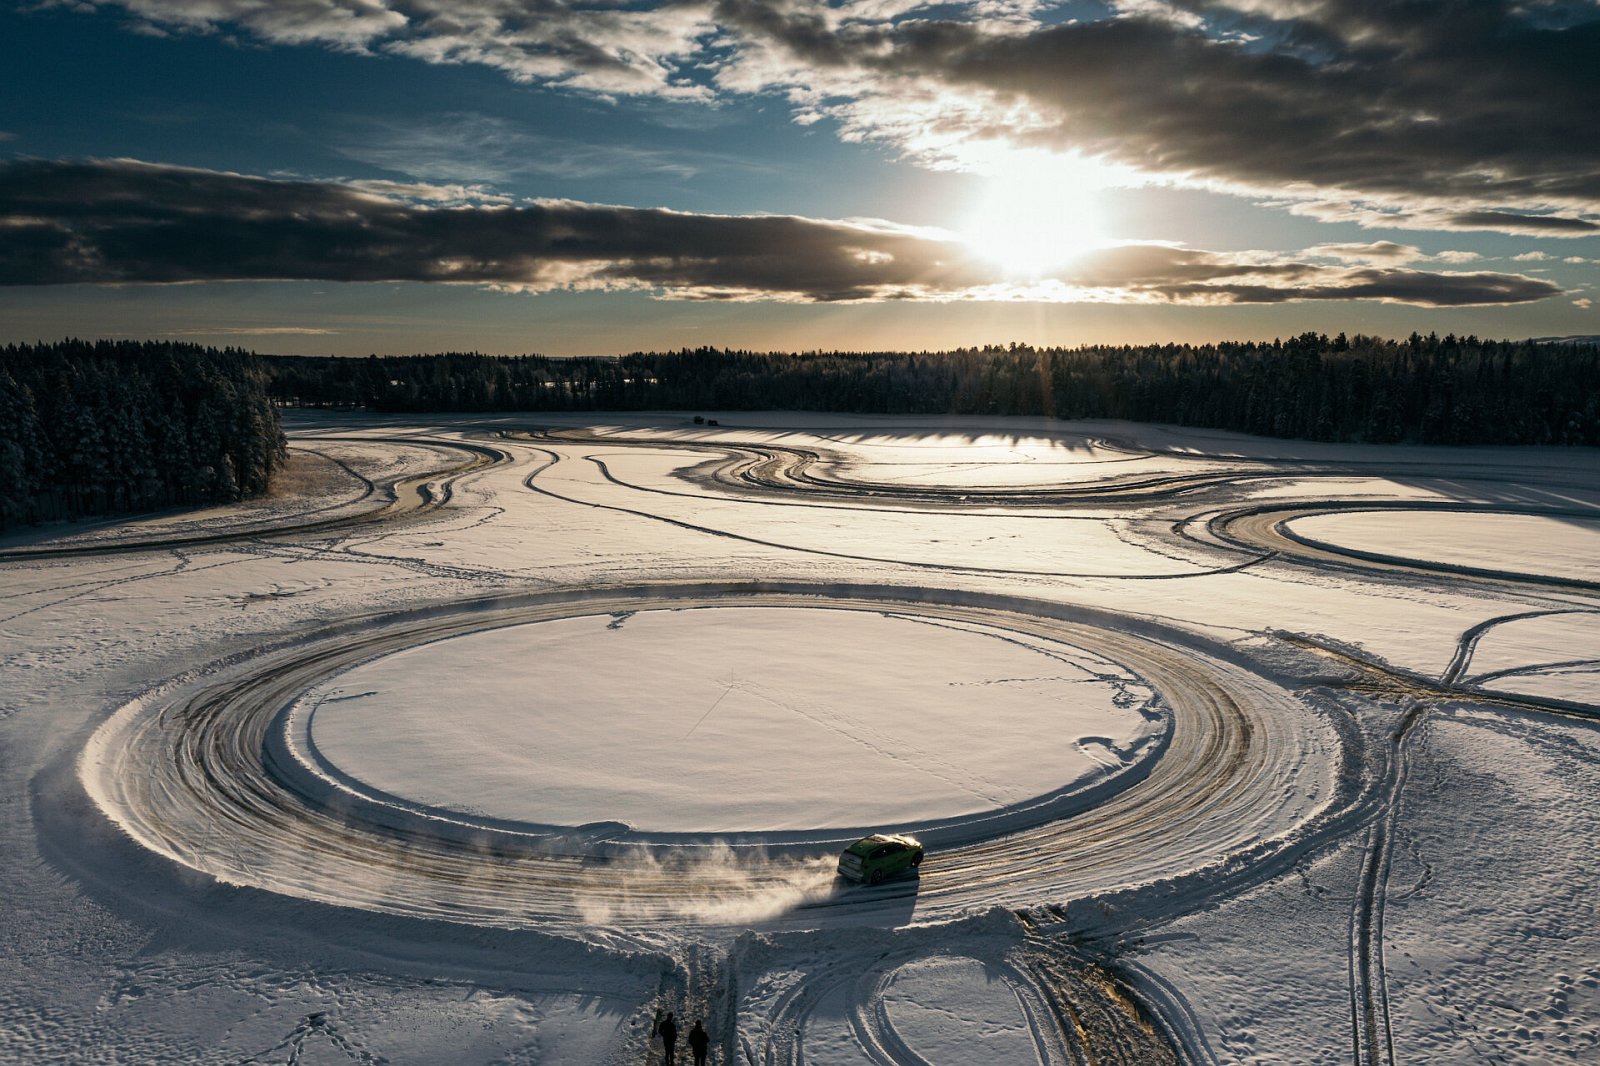 Skoda Drifting on Ice Record20th January 2023 Sweden Copyright Malcom Griffiths Contact:malcy1970@me.com IG:@malcy1970